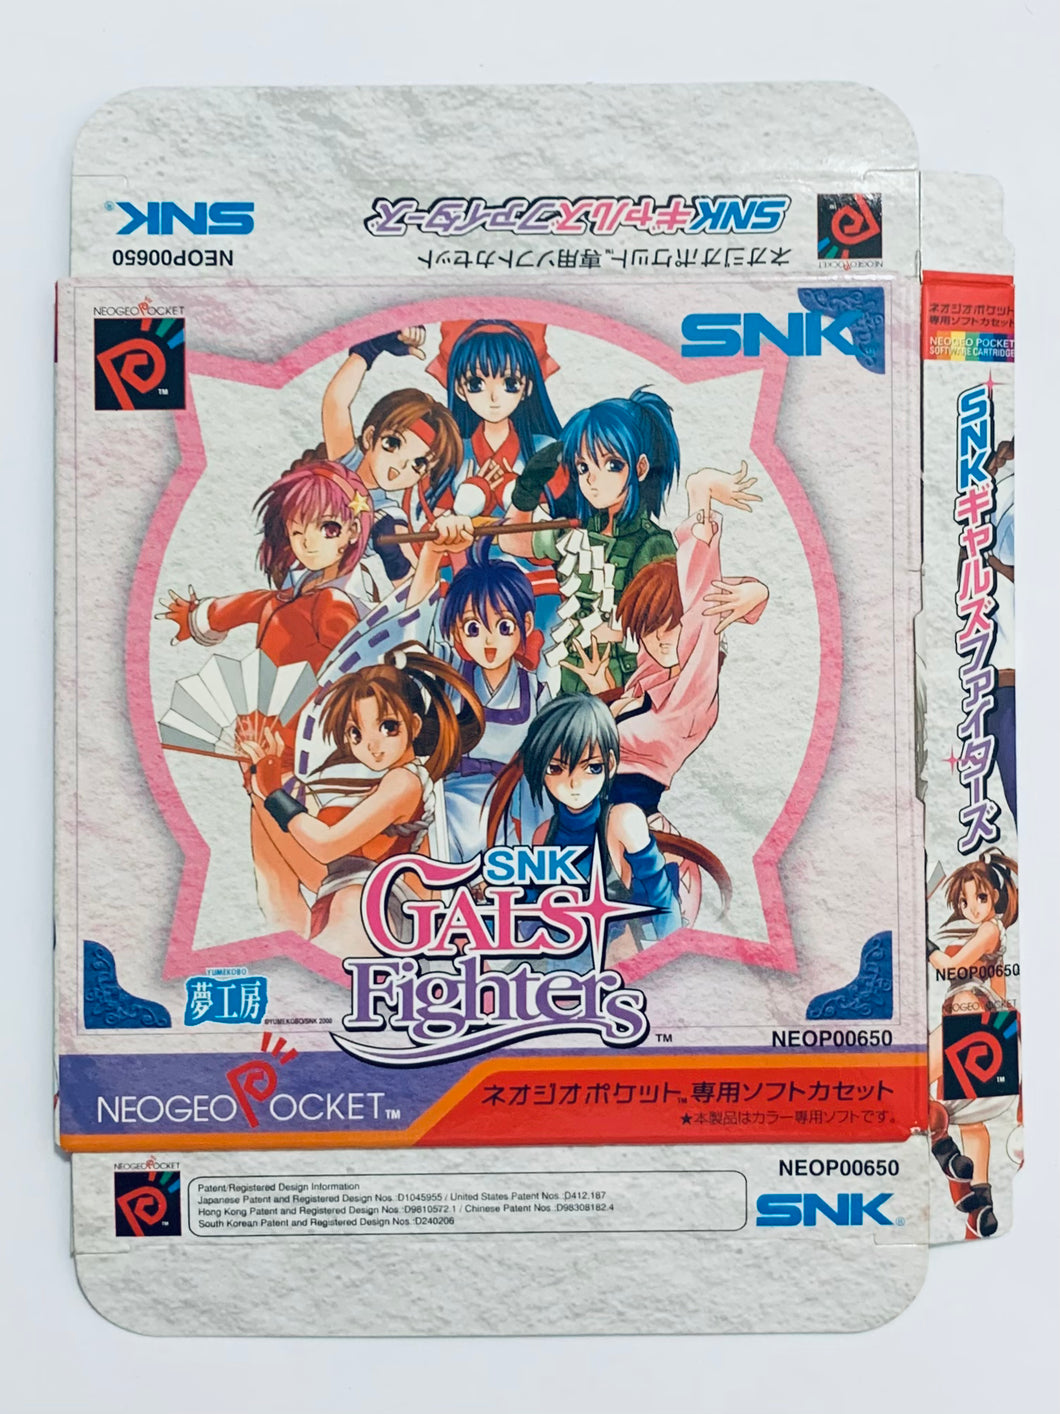 SNK Gals Fighters - Neo Geo Pocket Color - NGPC - JP - Box Only (NEOP00650)